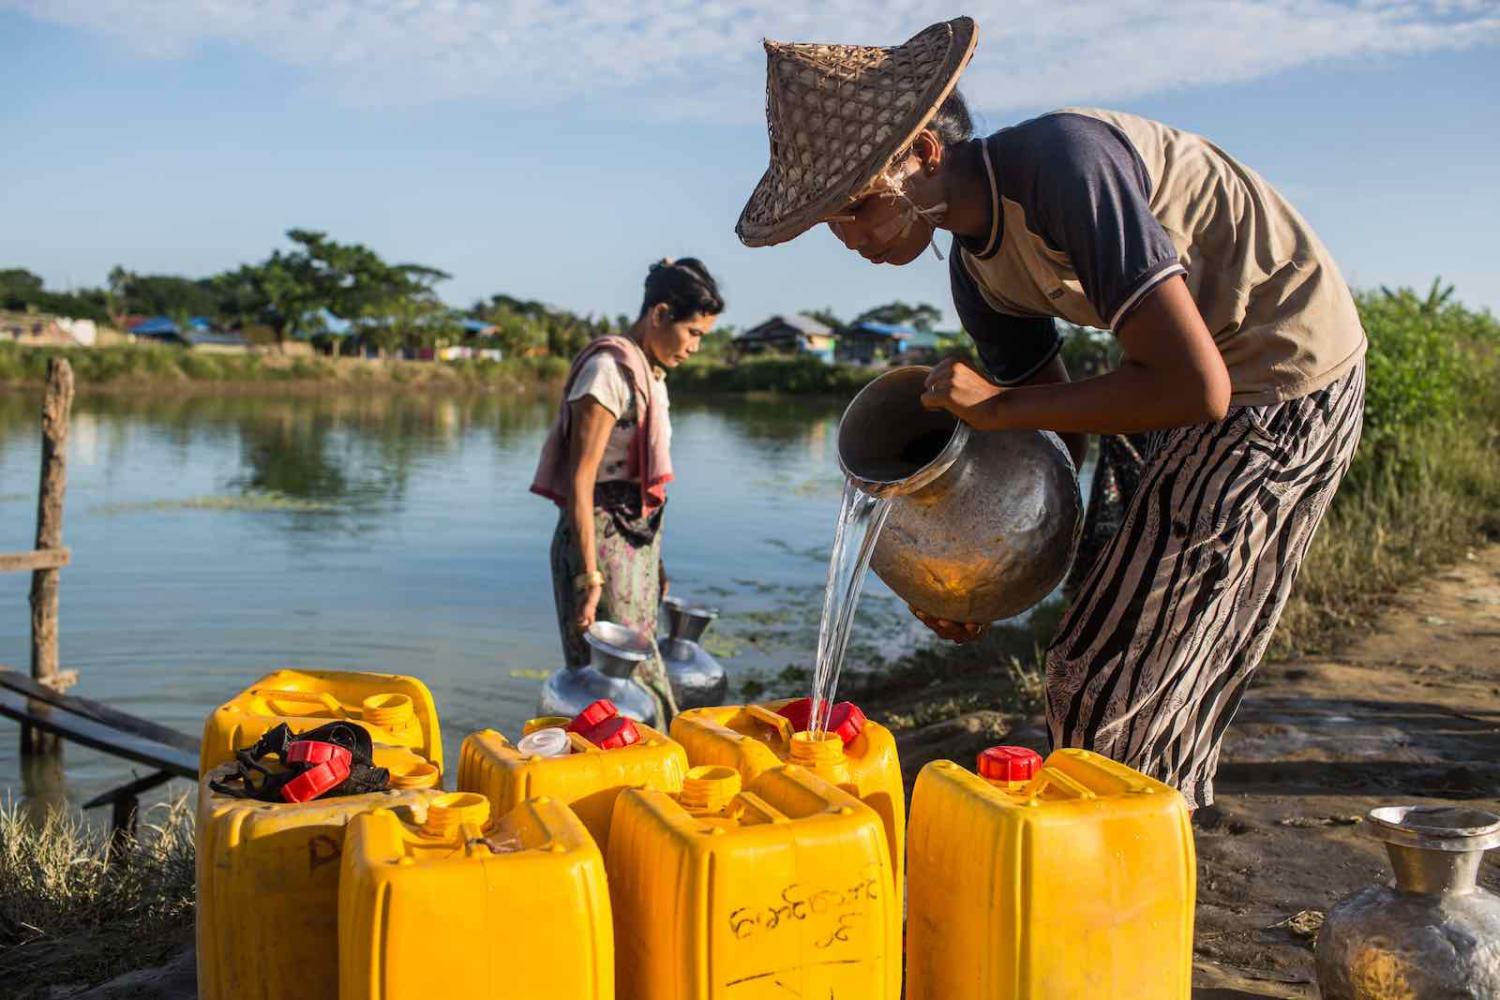 Collecting water in a camp for Rohingya Muslims displaced by the 2012 violence in Rakhine state, November 2017 in Sittwe, Myanmar (Lauren DeCicca/Getty Images)